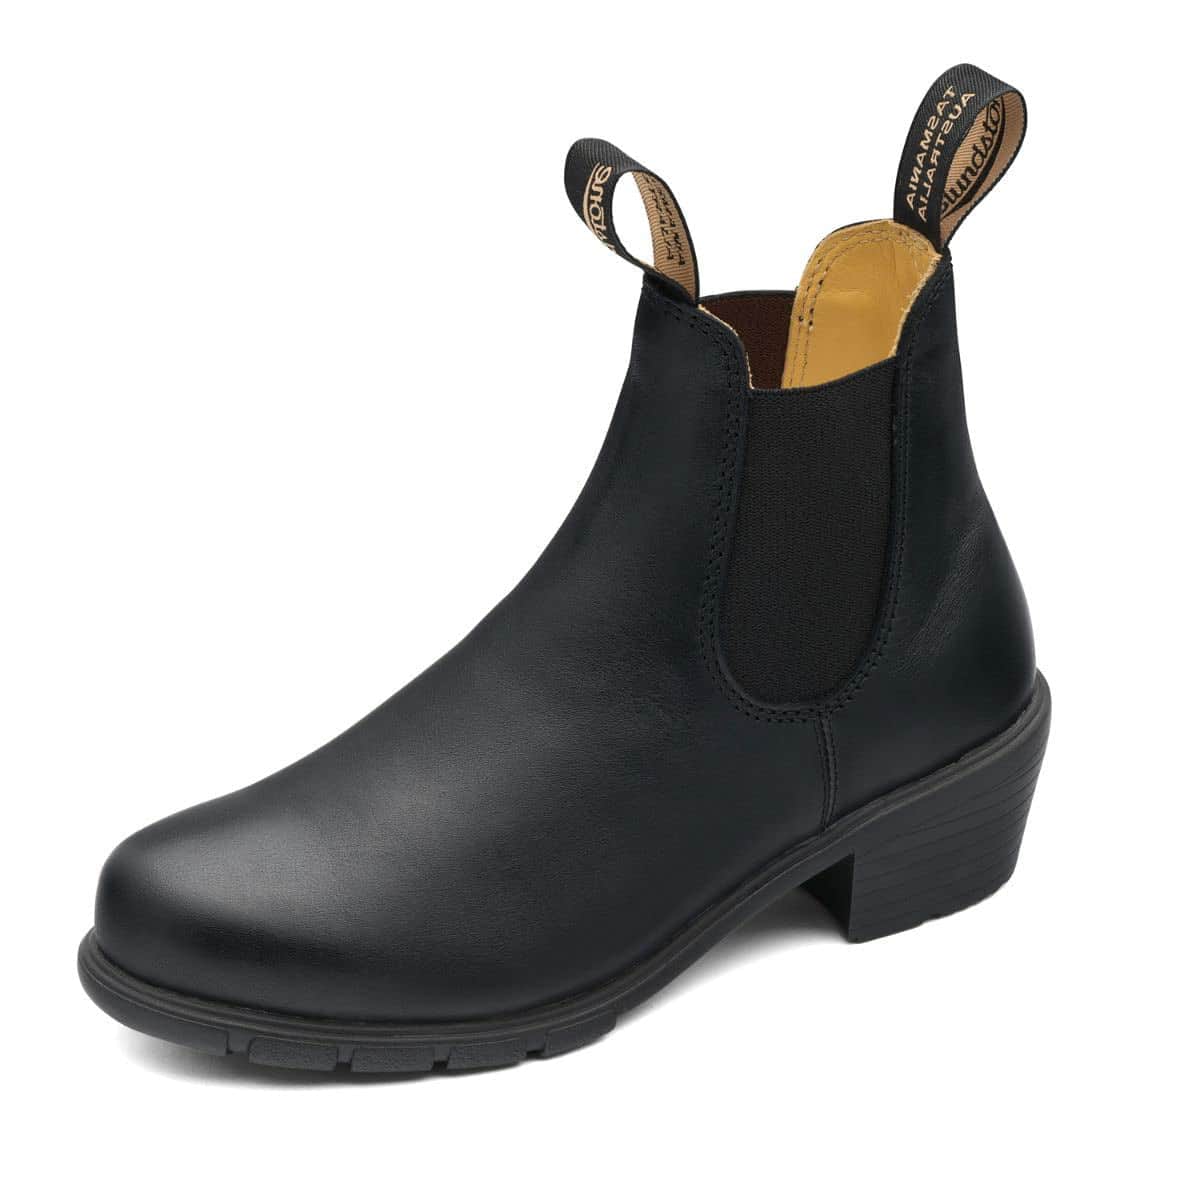 The stylish and lightweight design of the rustic brown 1677 Block Heel Chelsea boot from Blundstone offers a truly feminine style. Featuring a full grain leather upper. The elastic gore keeps its shape and makes it easy to put on and take off. Sturdy front and back tabs Footbed and heel comfort for all-day comfort. Steel shank for stability Durable rubber sole.